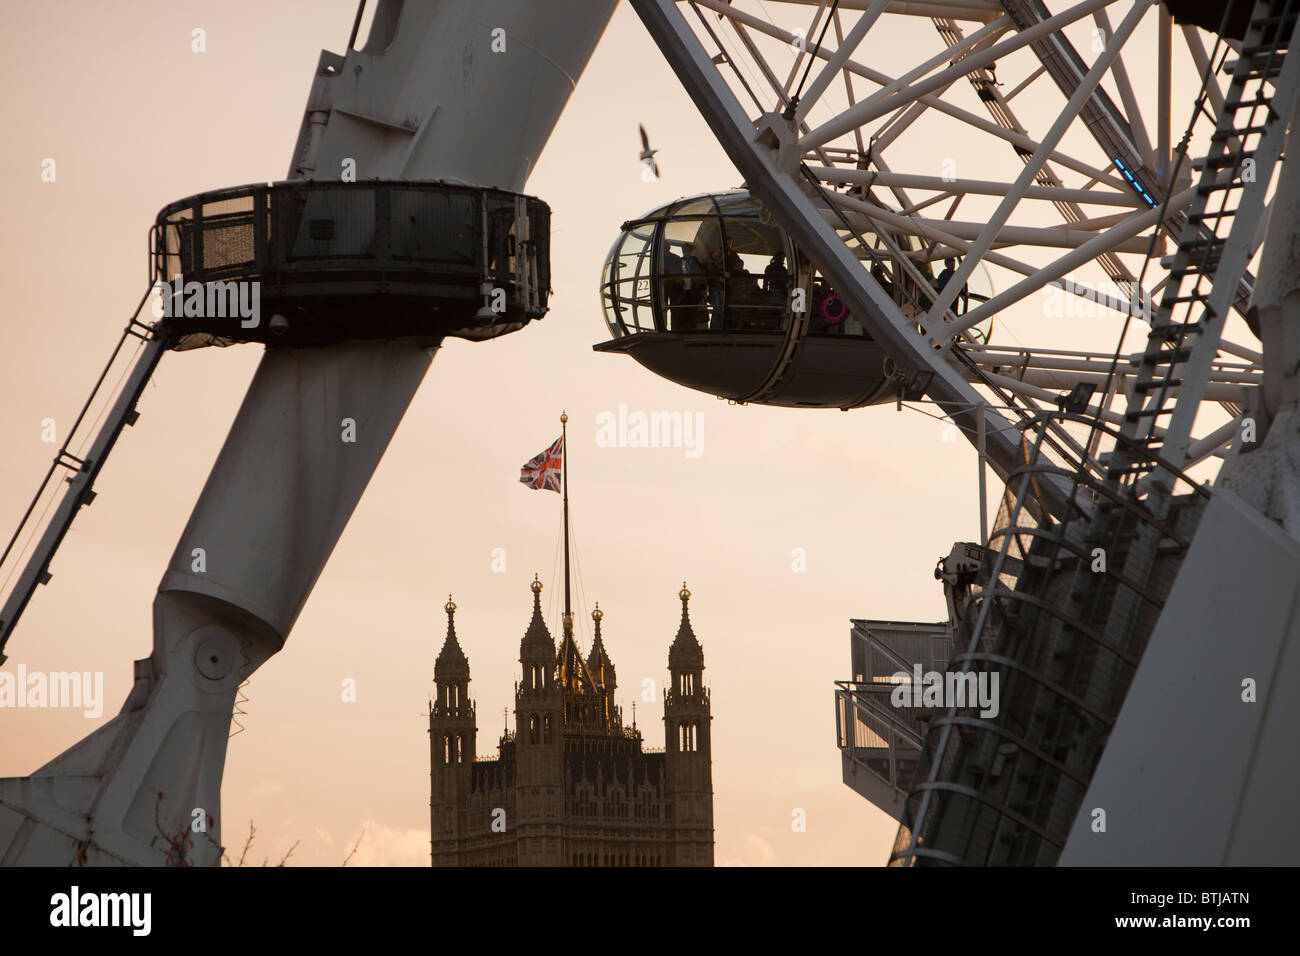 The London Eye on the Thames embankment in London at dusk. Stock Photo